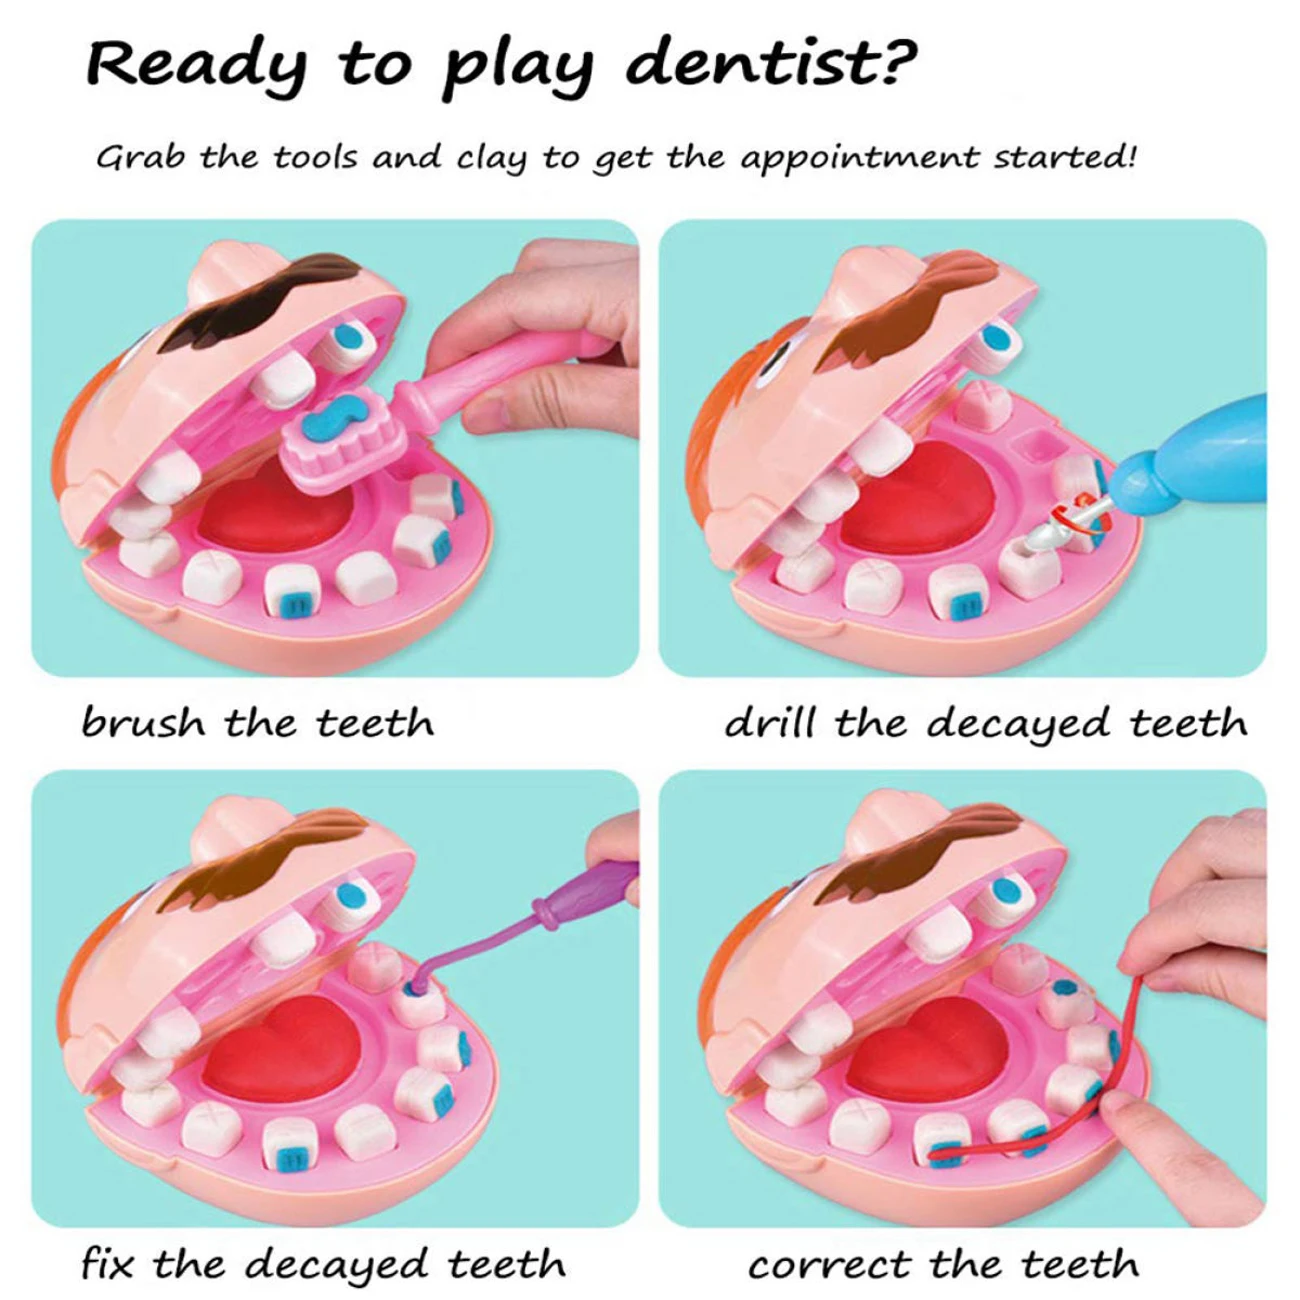 

Children Puzzle Toy Doctor Set Light Clay Plasticine Tools Simulation Play House Pretend Dentist DIY Clay Educational Tooth Mold